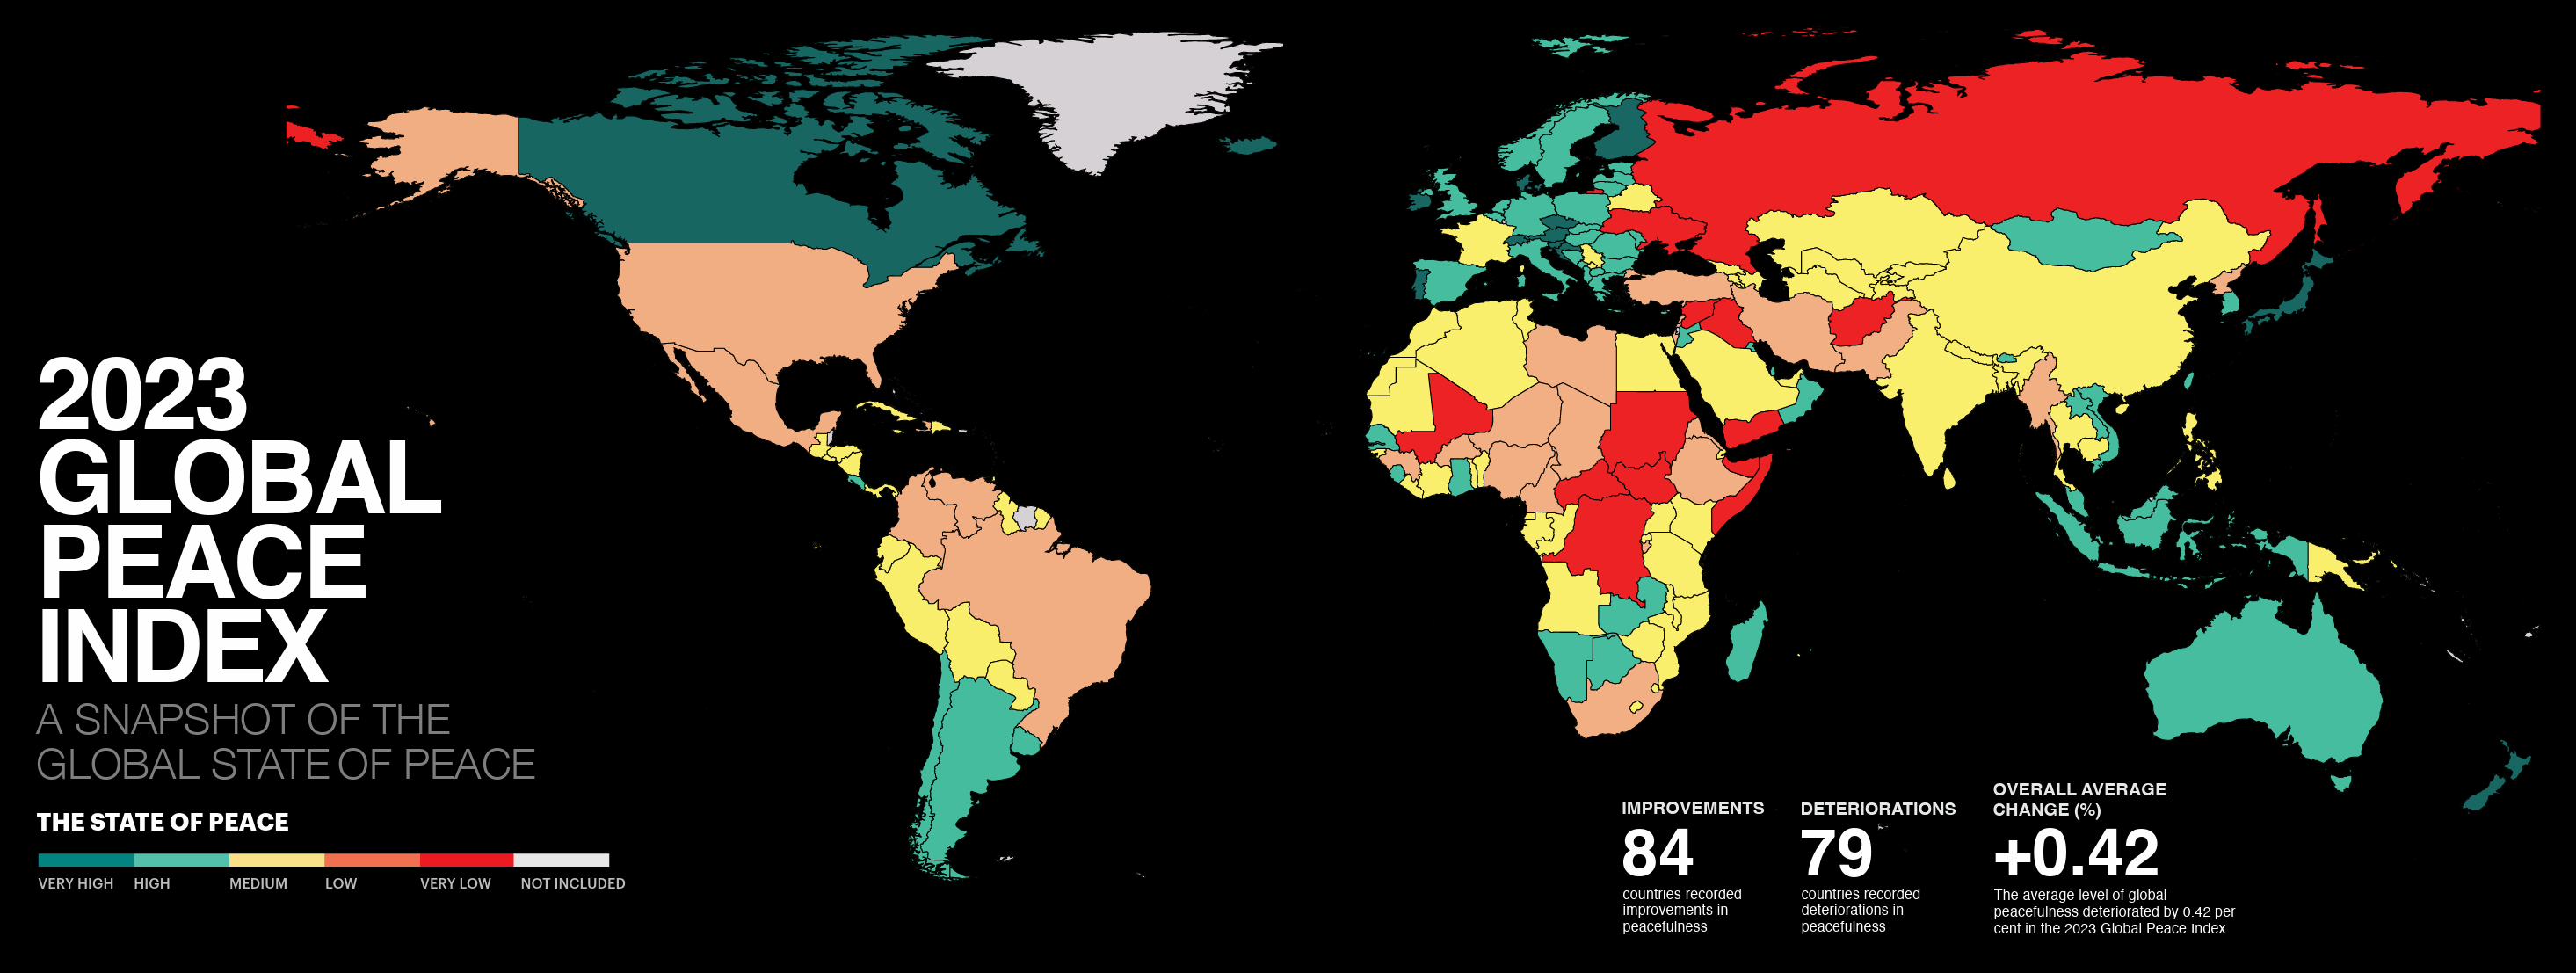 Map showing the Global Peace Index for 2023. In the period 2022-2023, deaths from global conflict increased by 96 percent to 238,000. 79 countries witnessed increased levels of conflict including Ethiopia, Myanmar, Ukraine, Israel, and South Africa. The global economic impact of violence increased by 17 percent or $1 trillion, to $17.5 trillion in 2022, equivalent to 13 percent of global. Conflicts became more internationalized, with 91 countries now involved in some form of external conflict, up from 58 in 2008. GDP Graphic: IEP